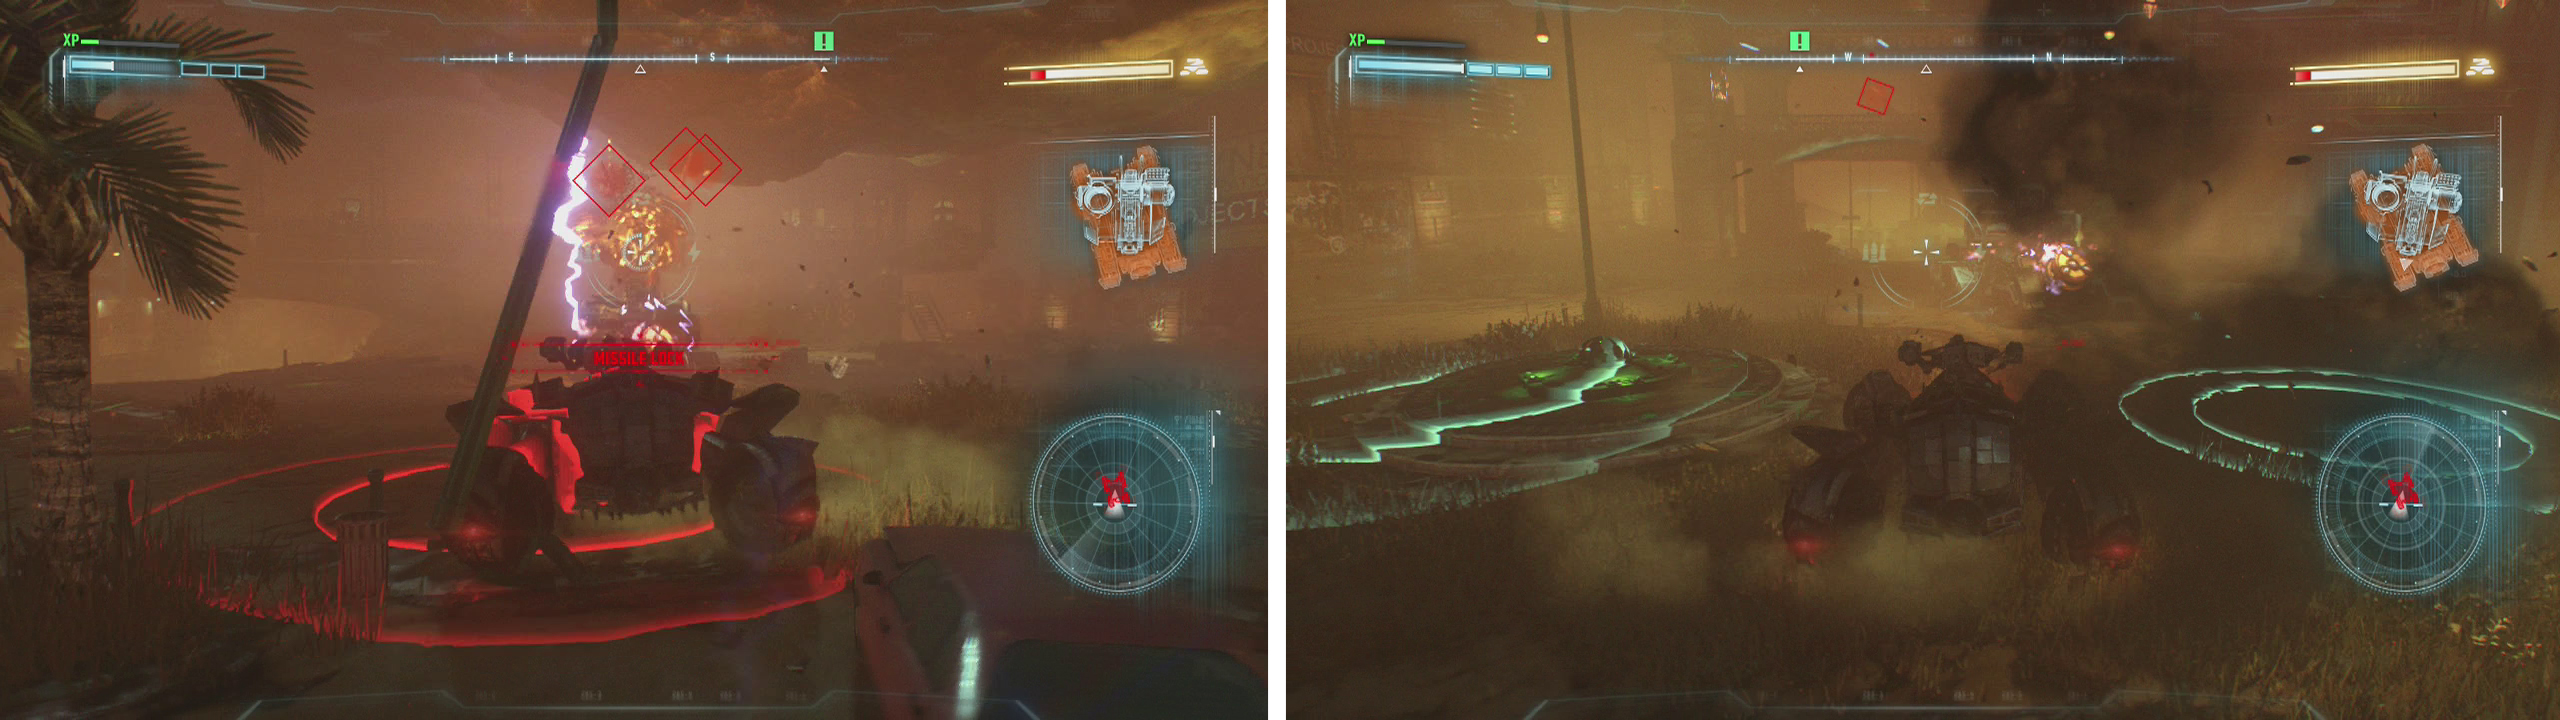 Use dodge to avoid the red grenade indicators and shoot down the missiles (left). Focus on shooting the yellow weak spot on the front of the tank (right).